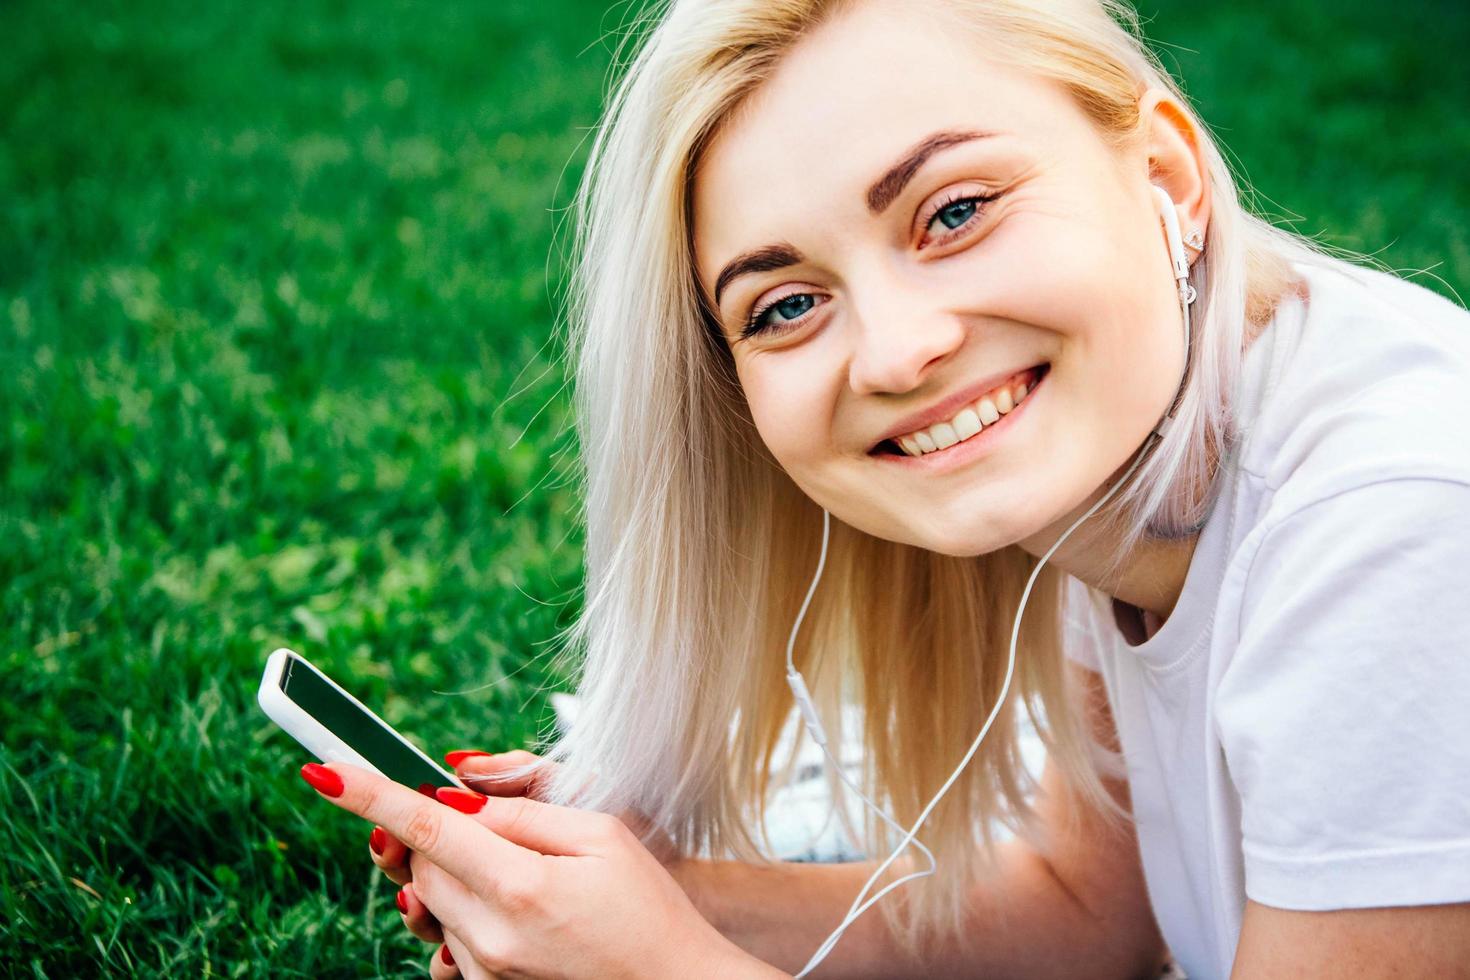 Woman in headphones and smartphone in hands listens to music photo